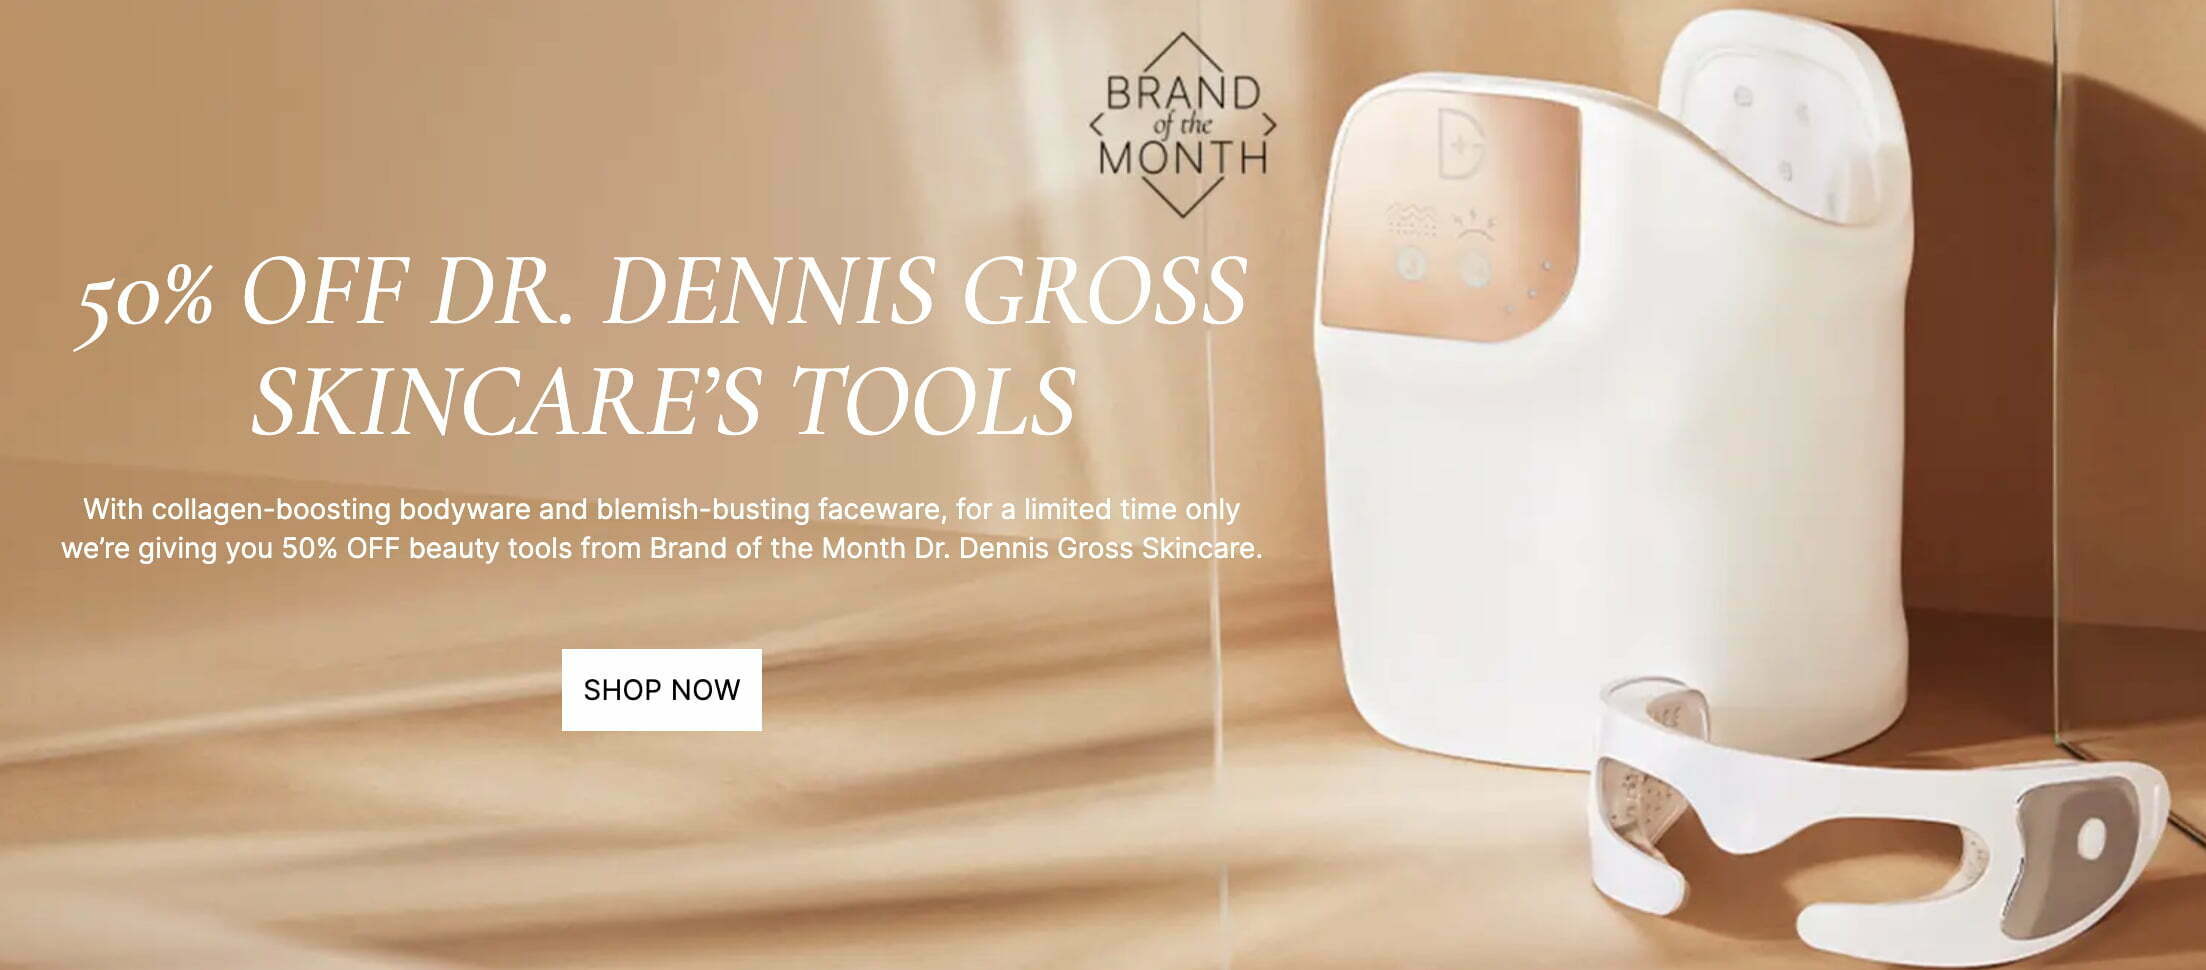 50% off Dr. Dennis Gross Skincare's Tools at Cult Beauty